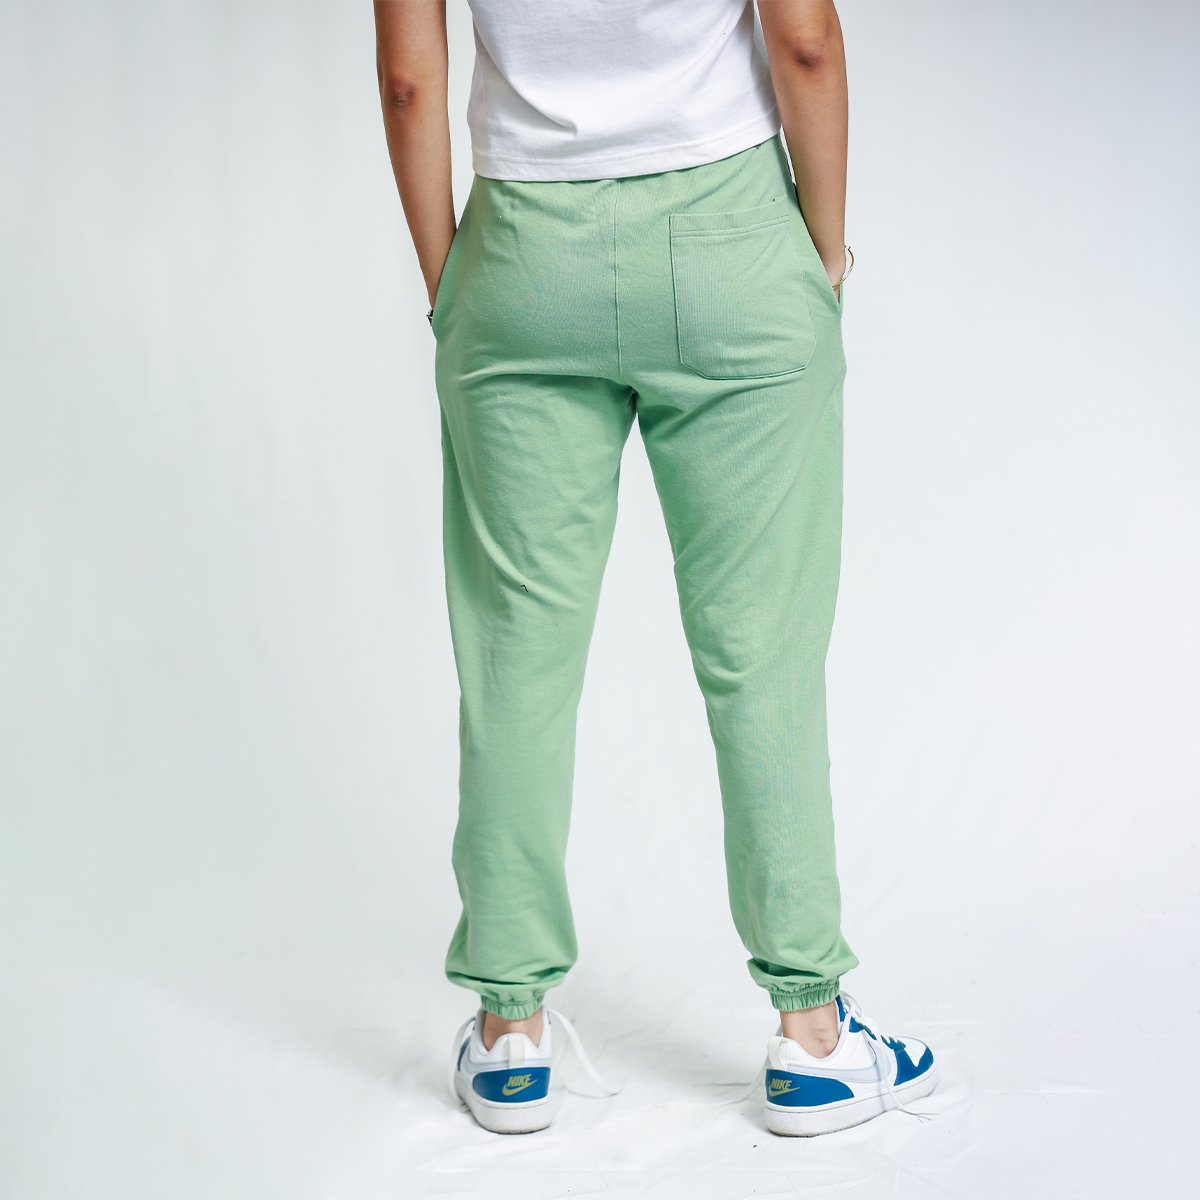 Light Olive Green Unisex French-Terry Sweatpants (Summer-Friendly)